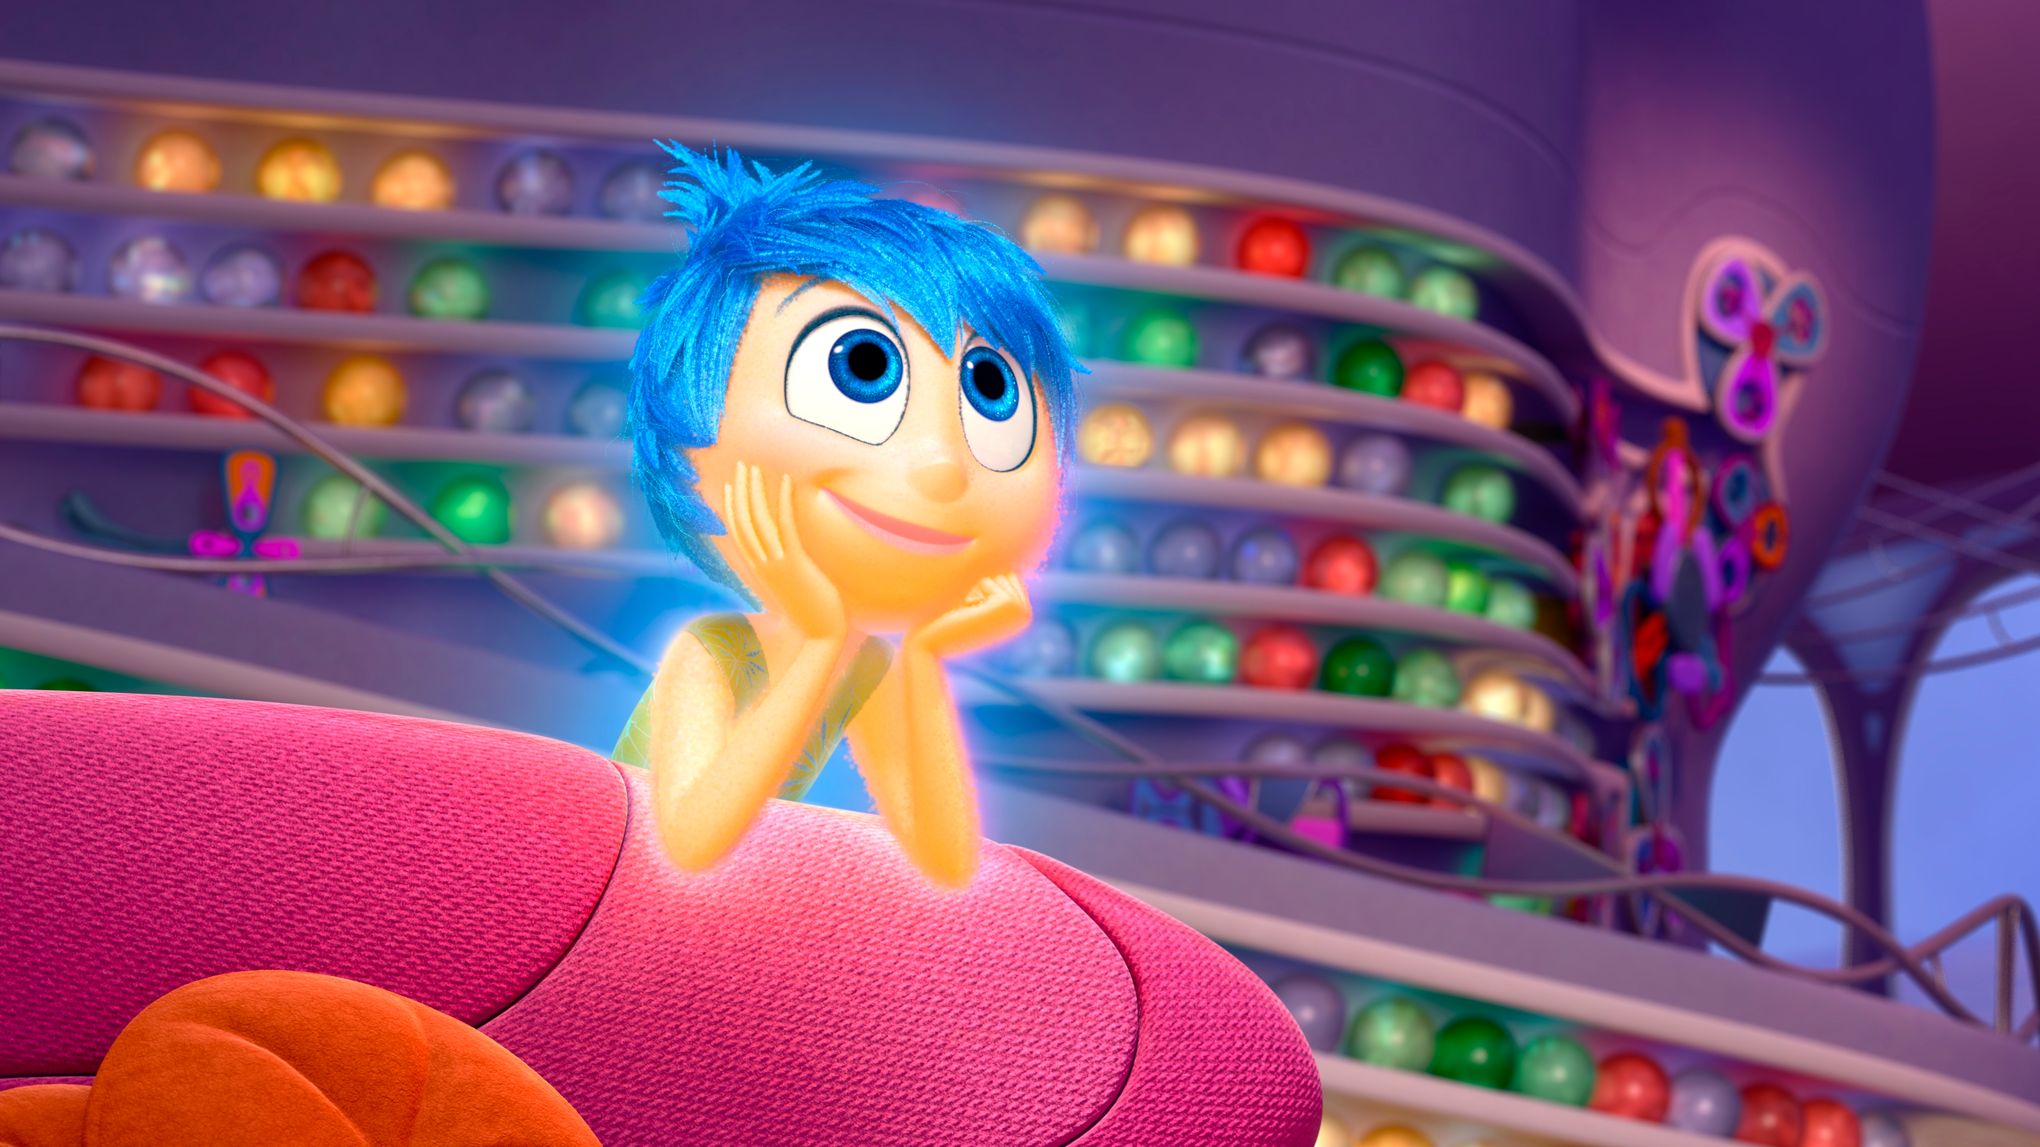 Amy Poehler takes pride and joy in 'Inside Out